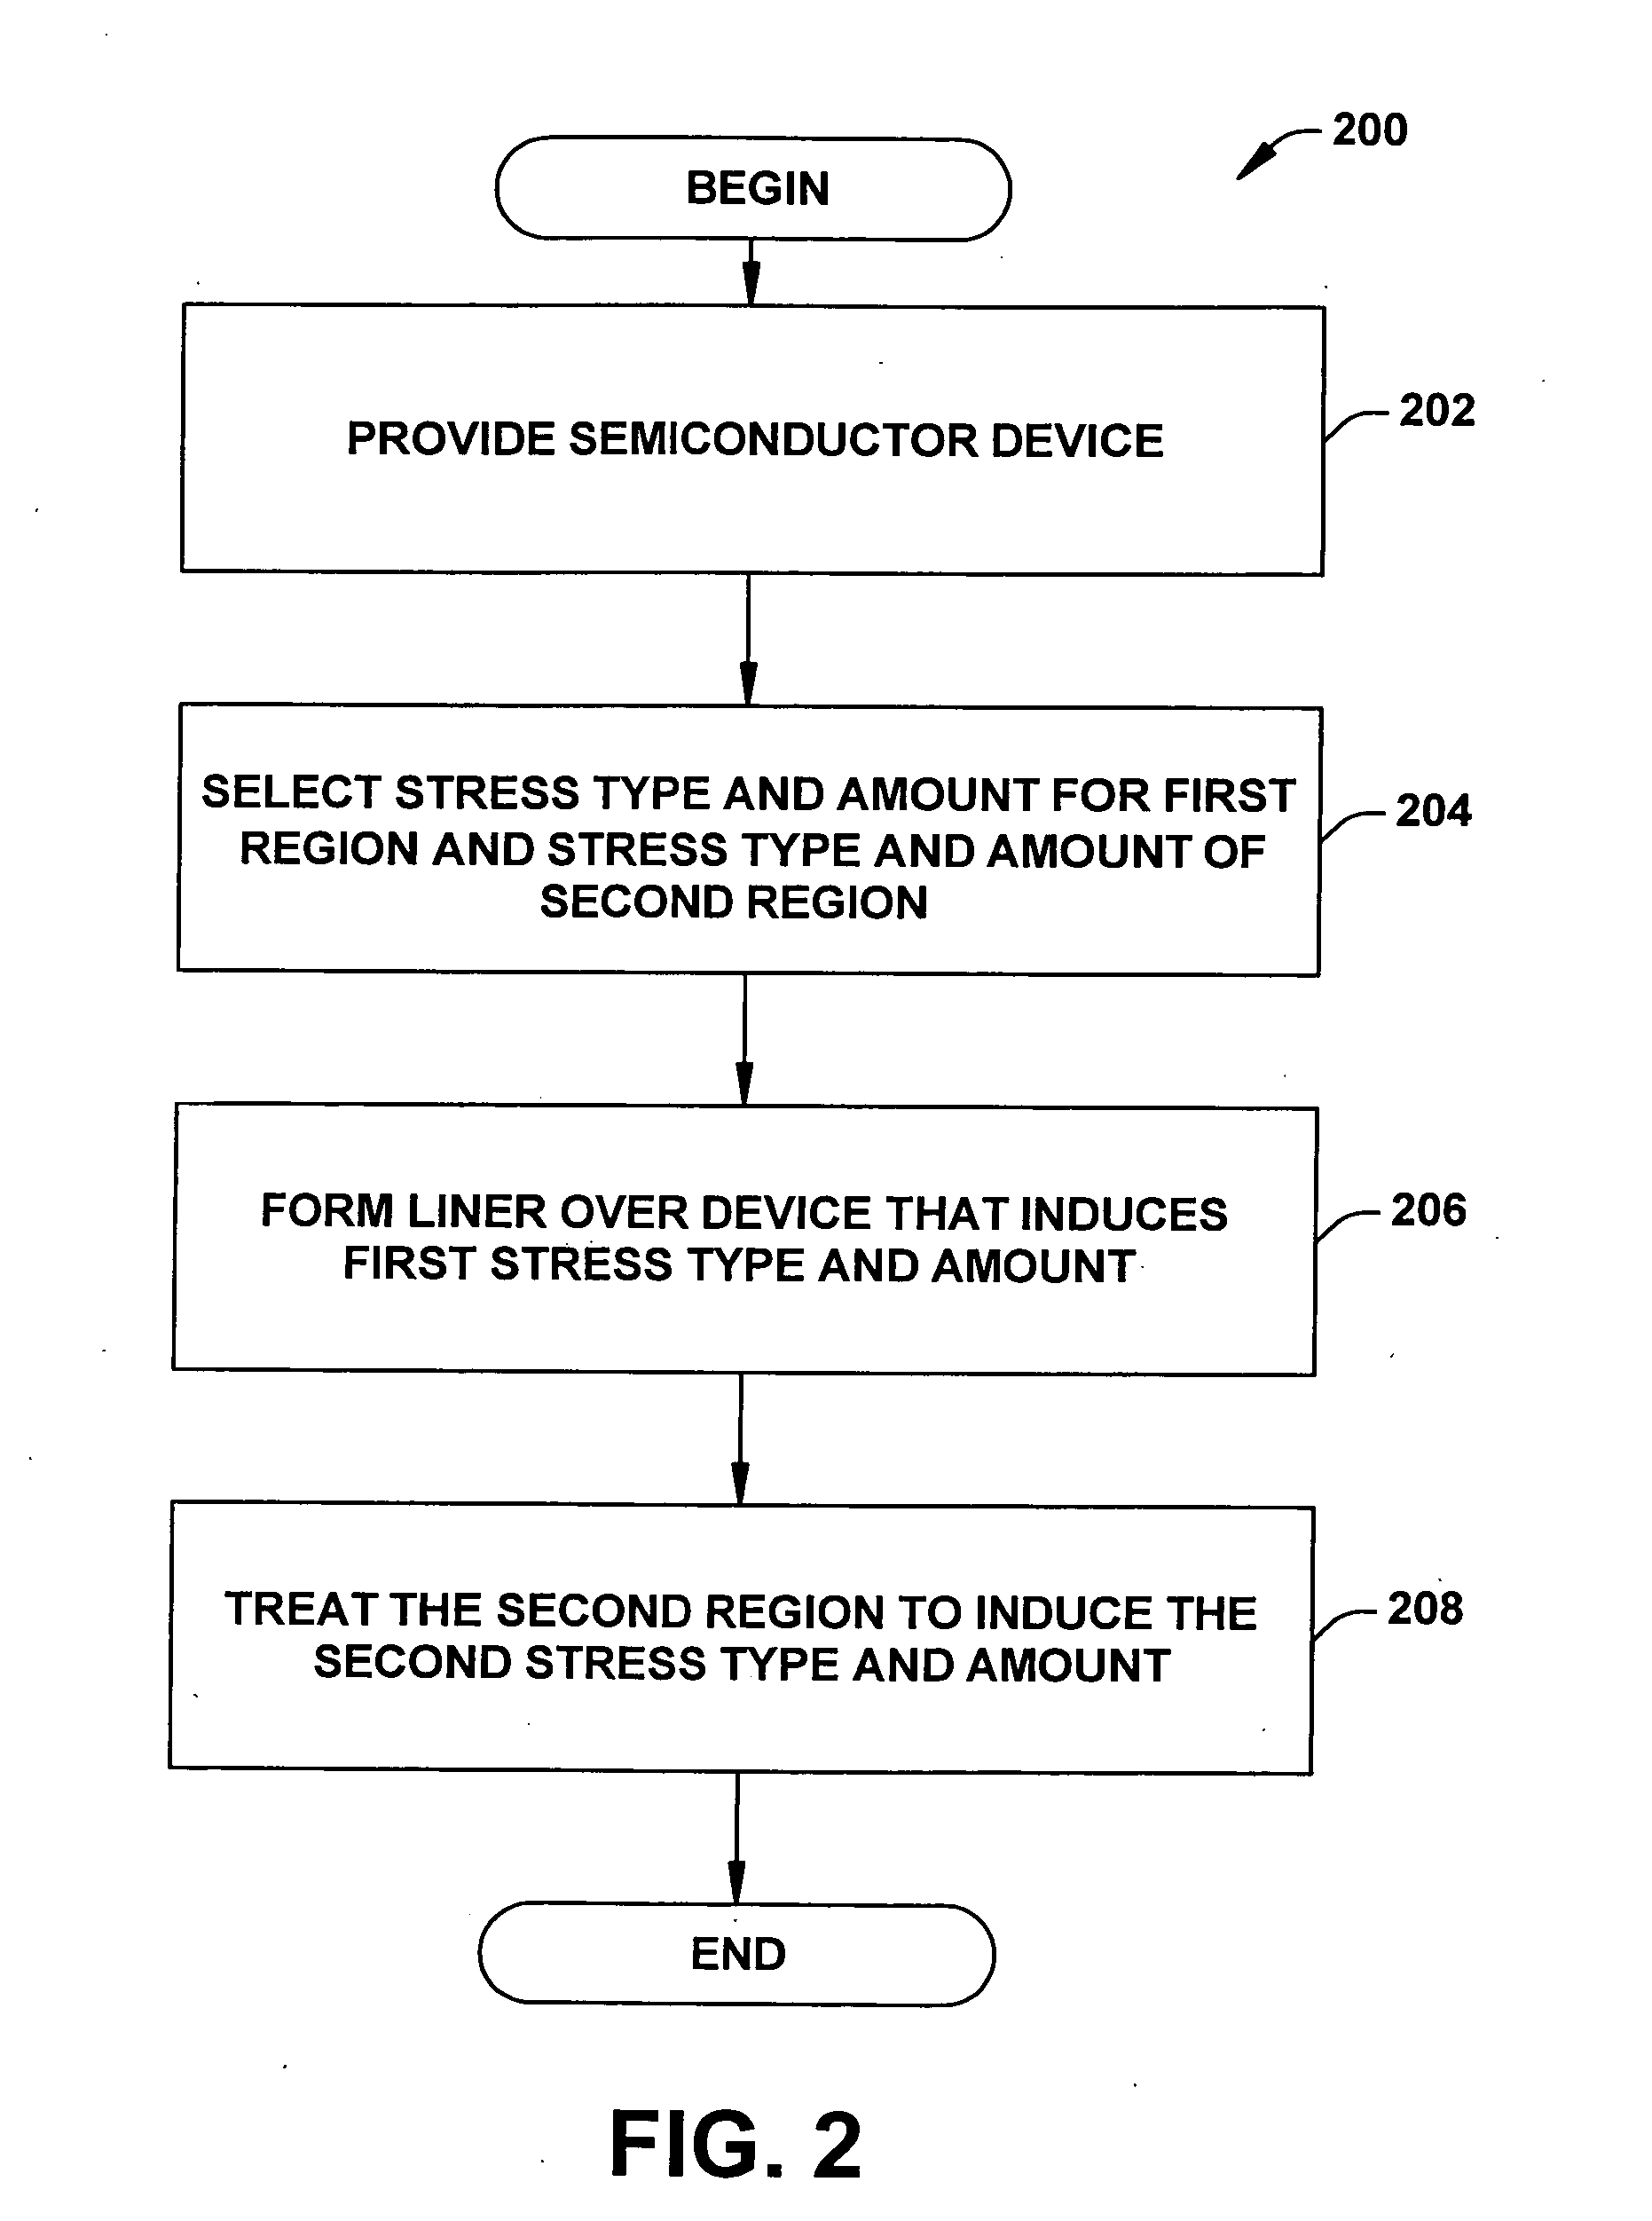 Systems and methods that selectively modify liner induced stress